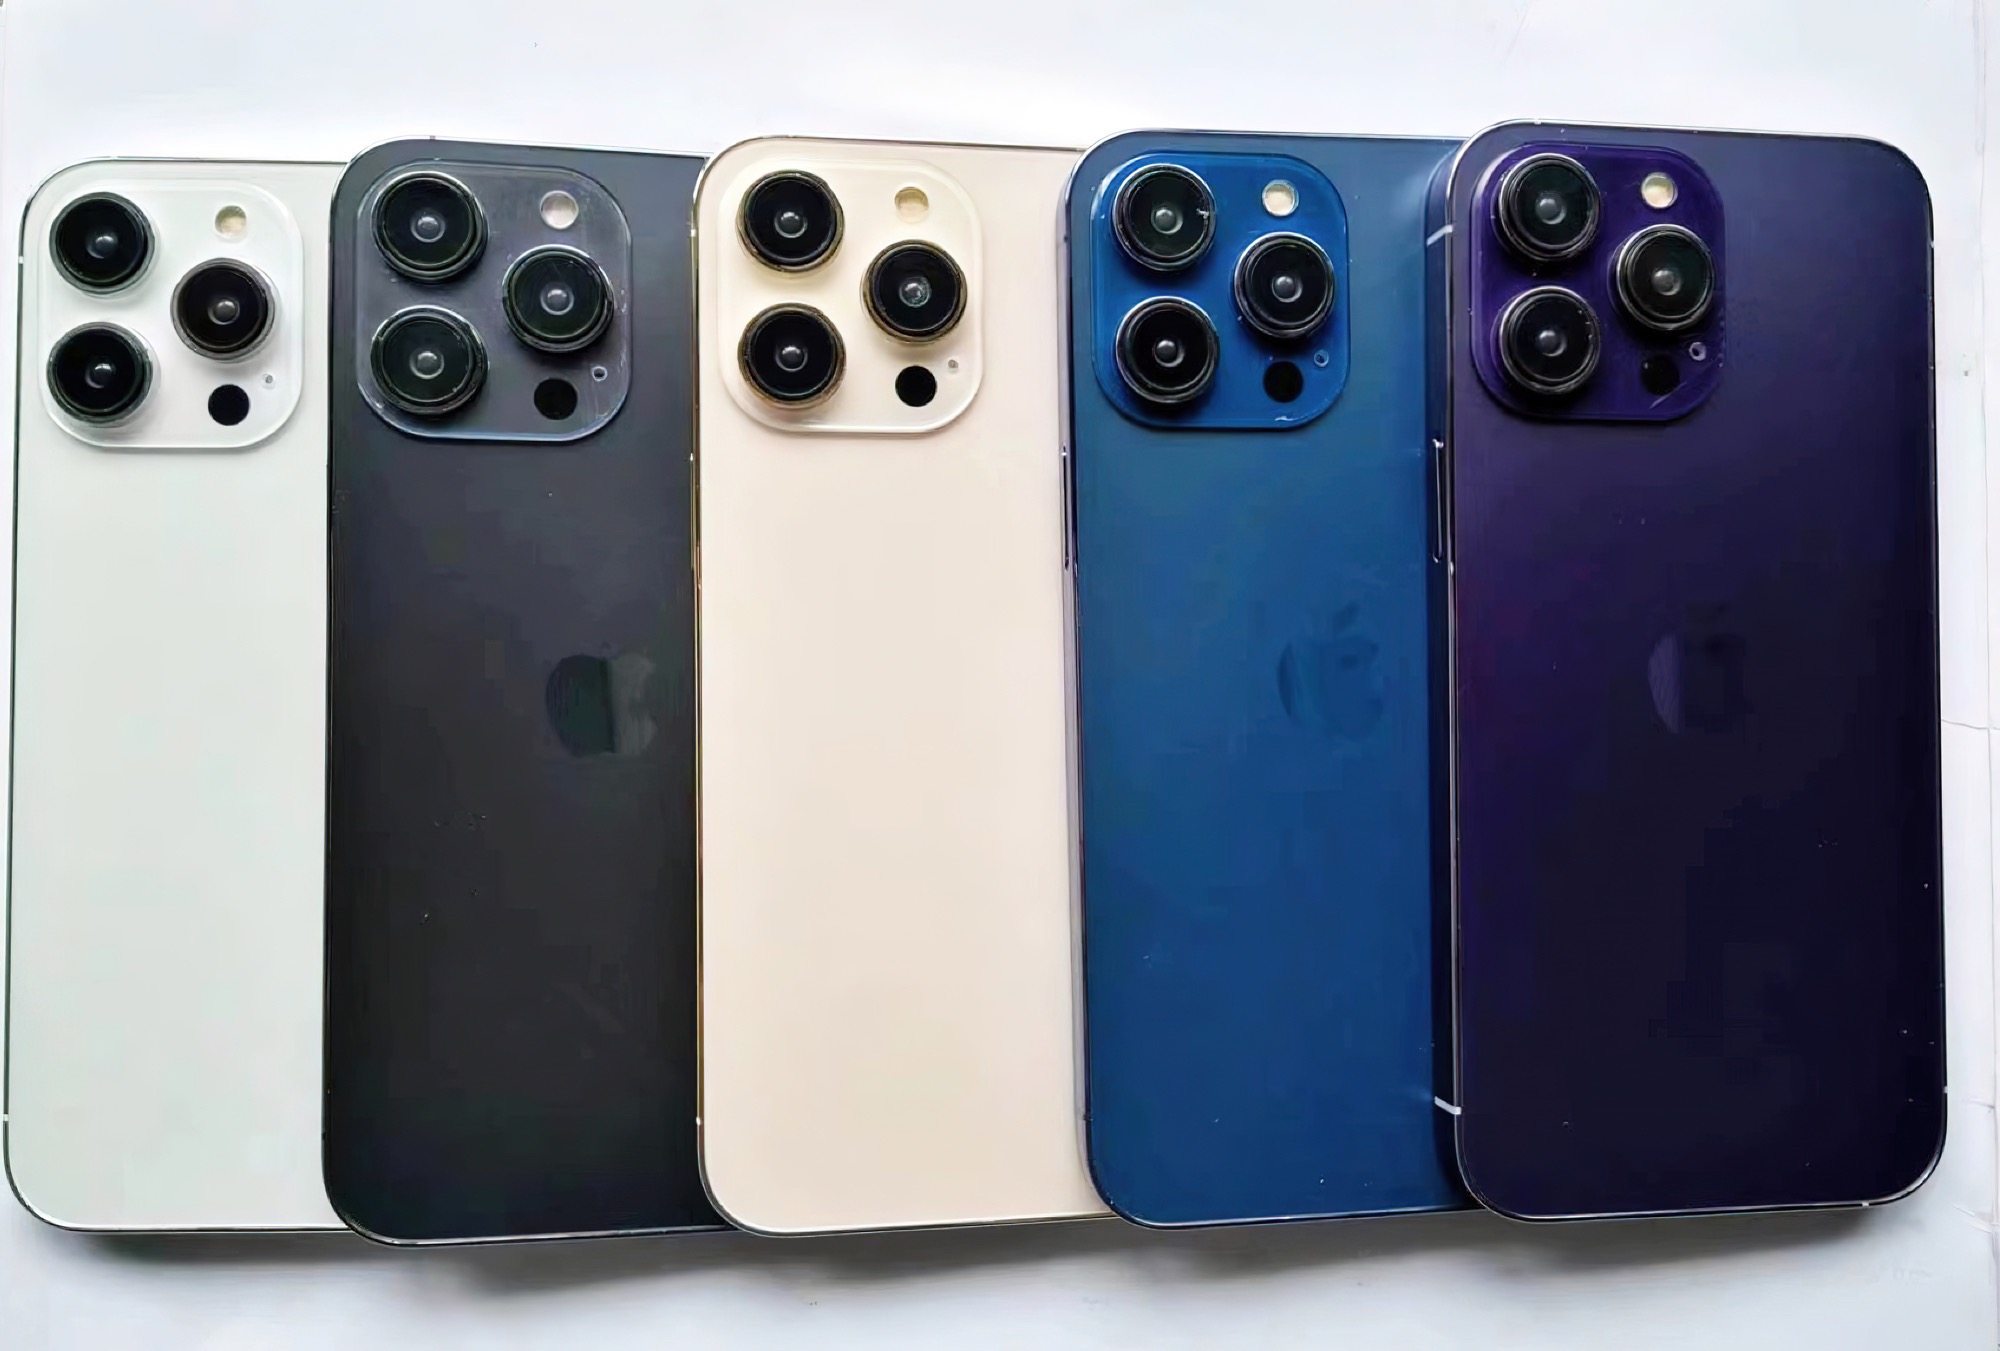 Fancy iPhone 14 Pro colors shown in new dummy pictures, video